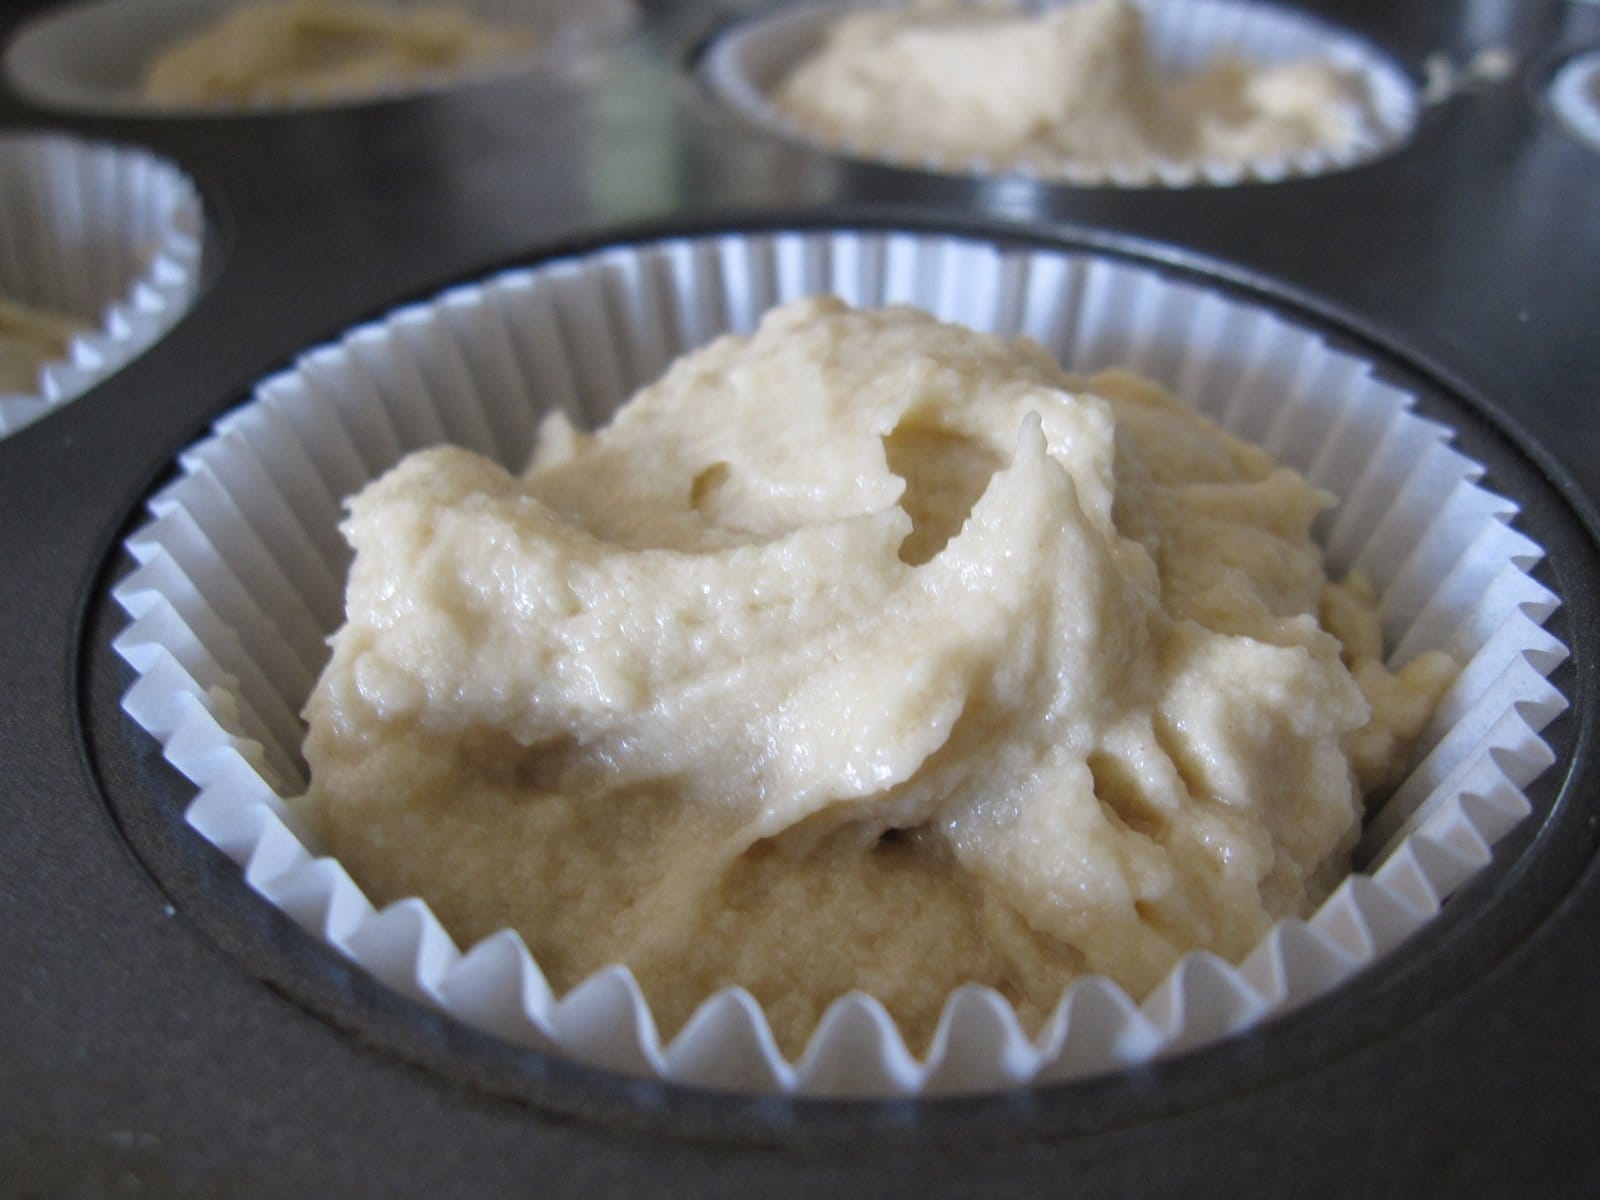 Close-up of cupcake batter in a muffin cup